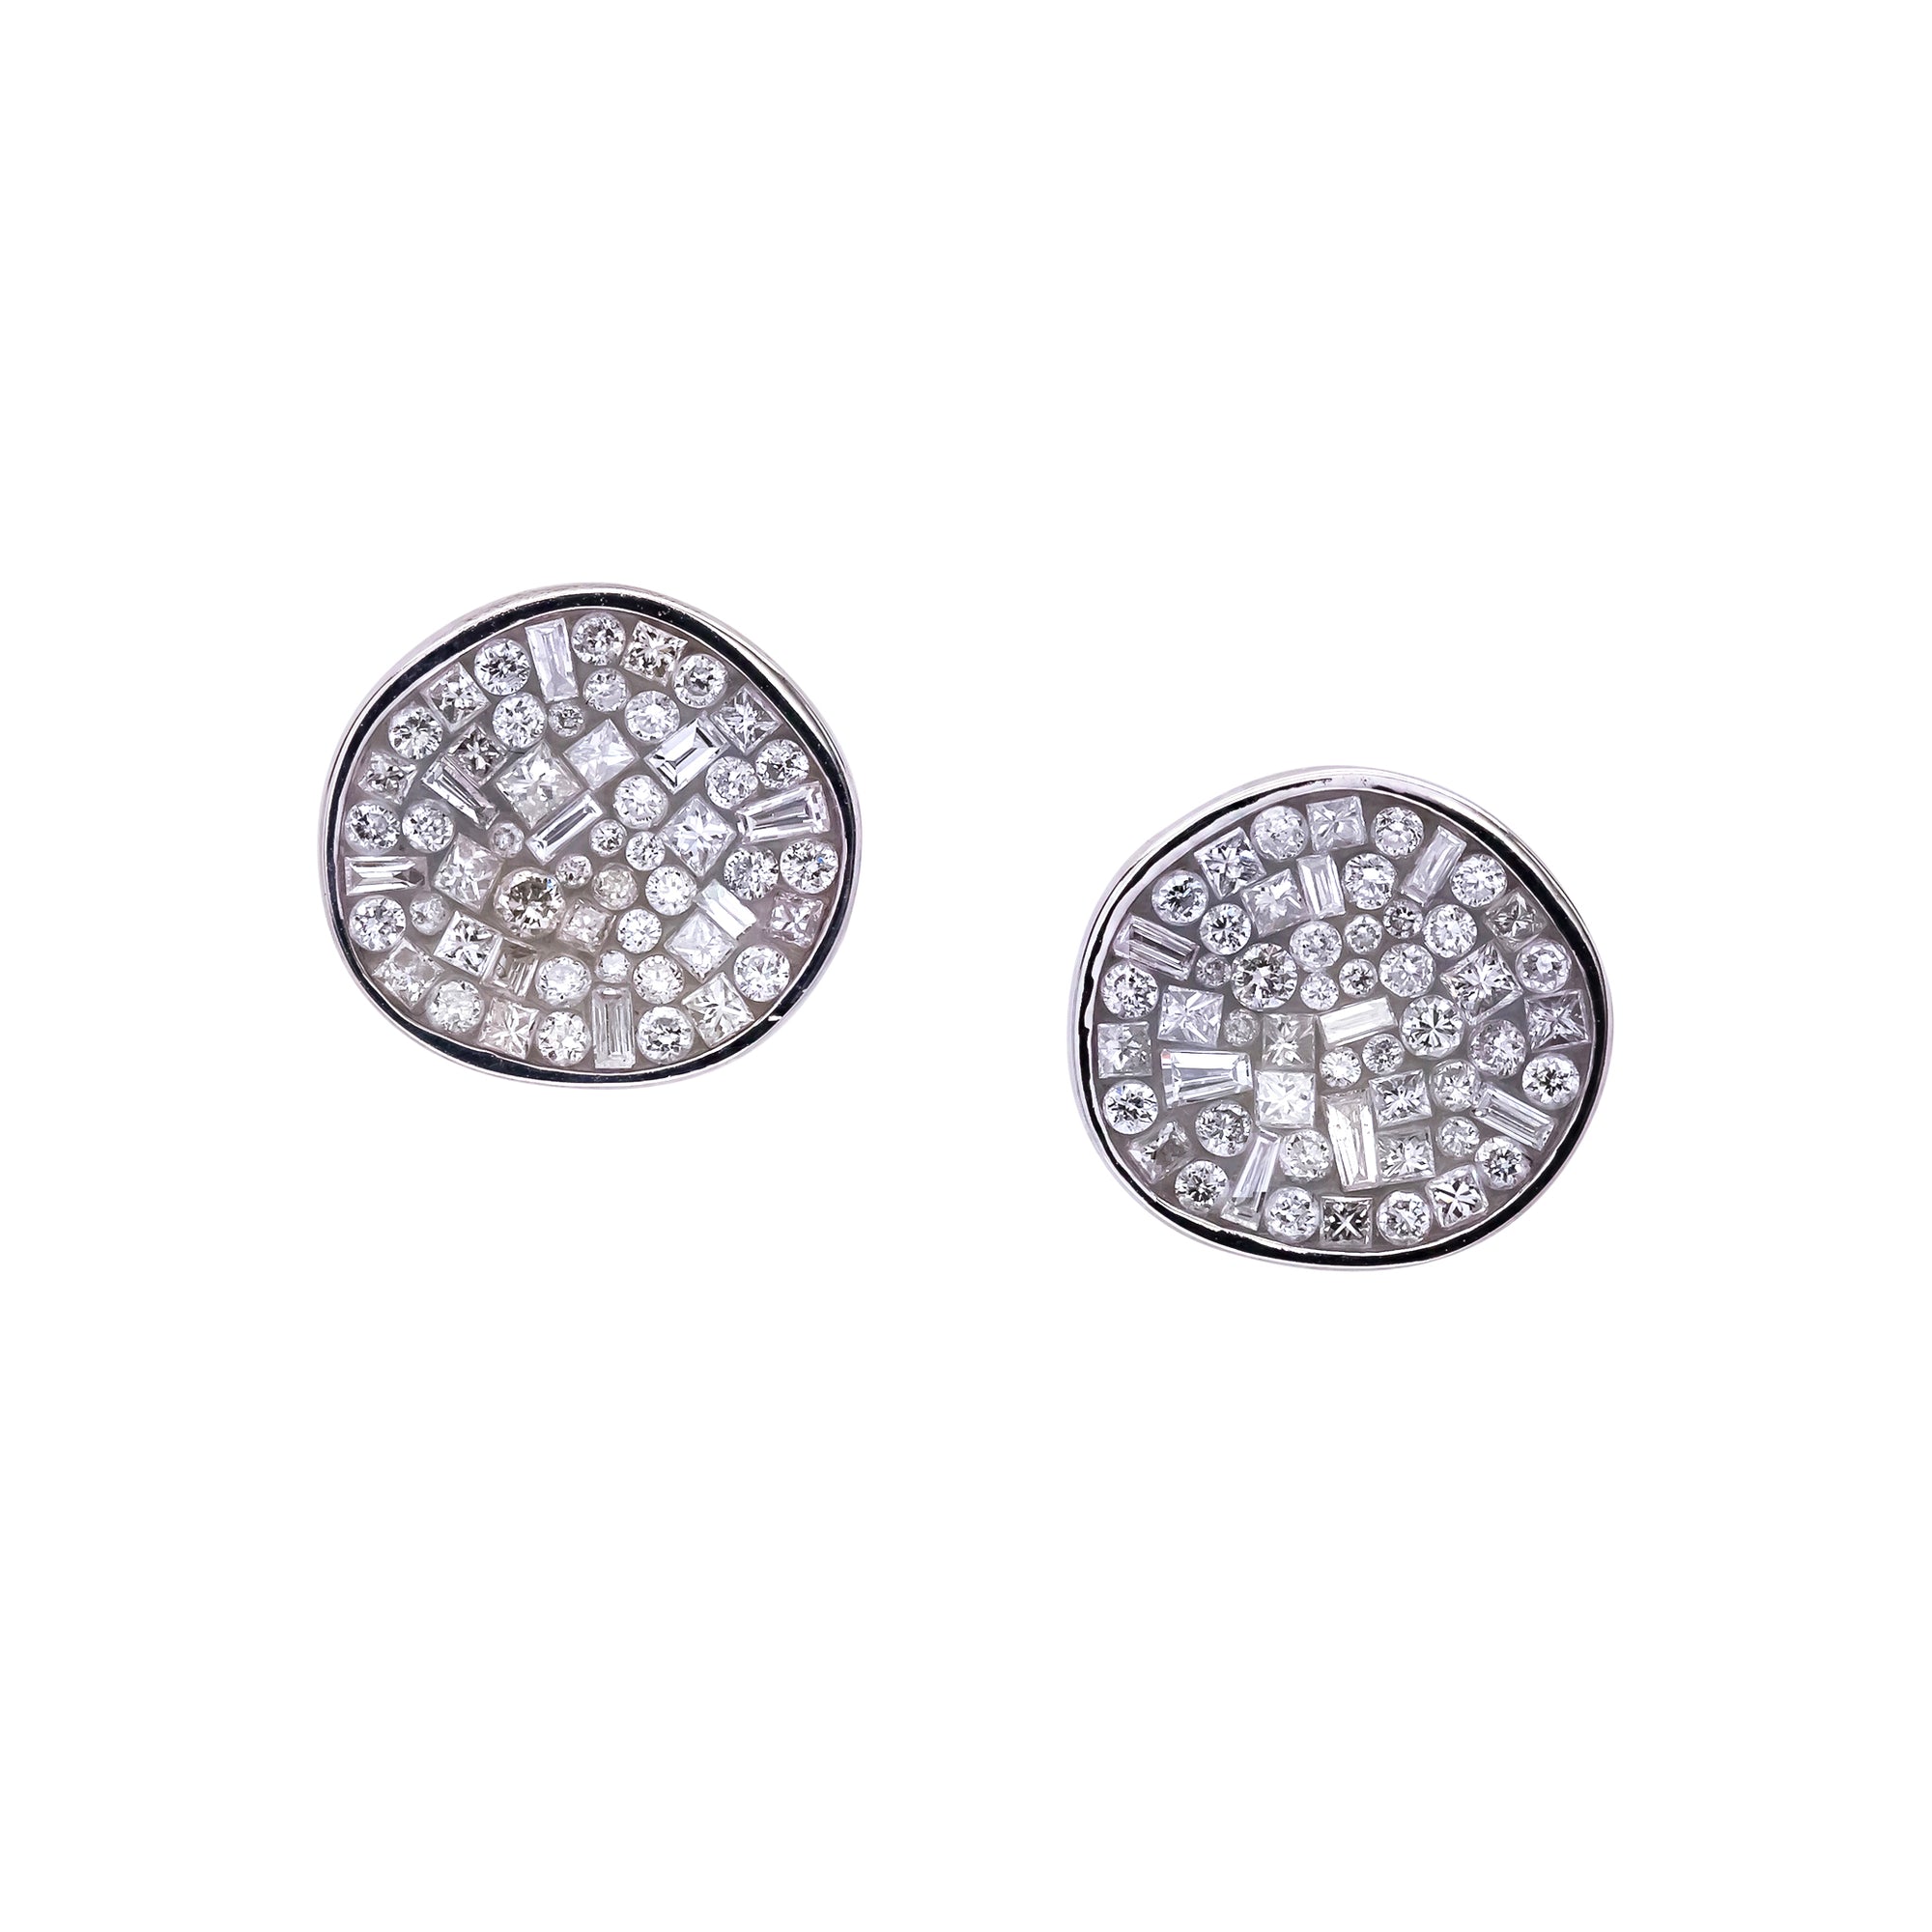 Diamond Earring Buttons by Pleve available at Talisman Collection Fine Jewelers in El Dorado Hills, CA and online. Specs: Organic shape button earrings, .90 cttw diamonds, 18k white gold, 12mm. 